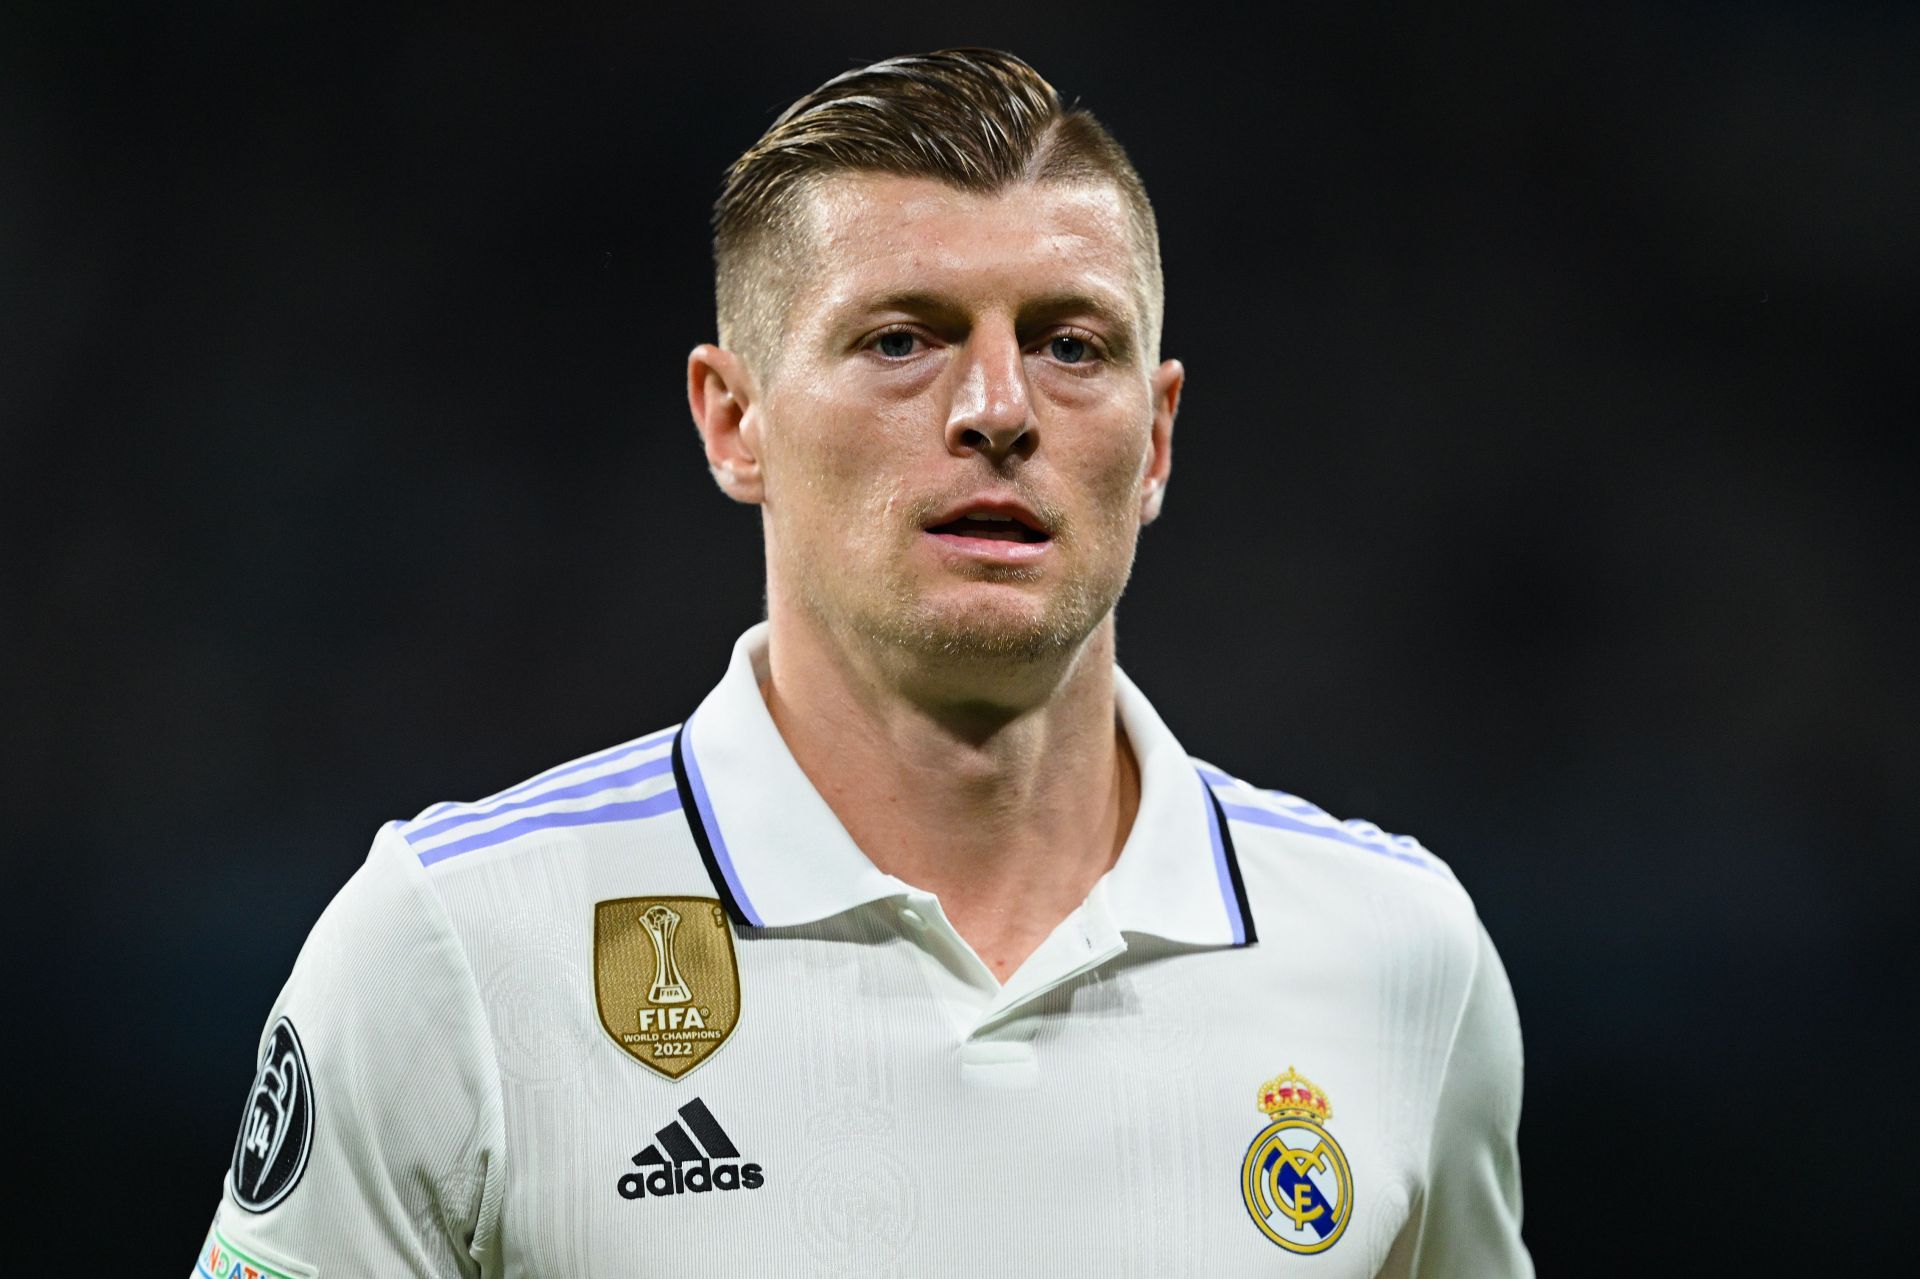 Toni Kroos has extended his stay at the Santiago Bernabeu.